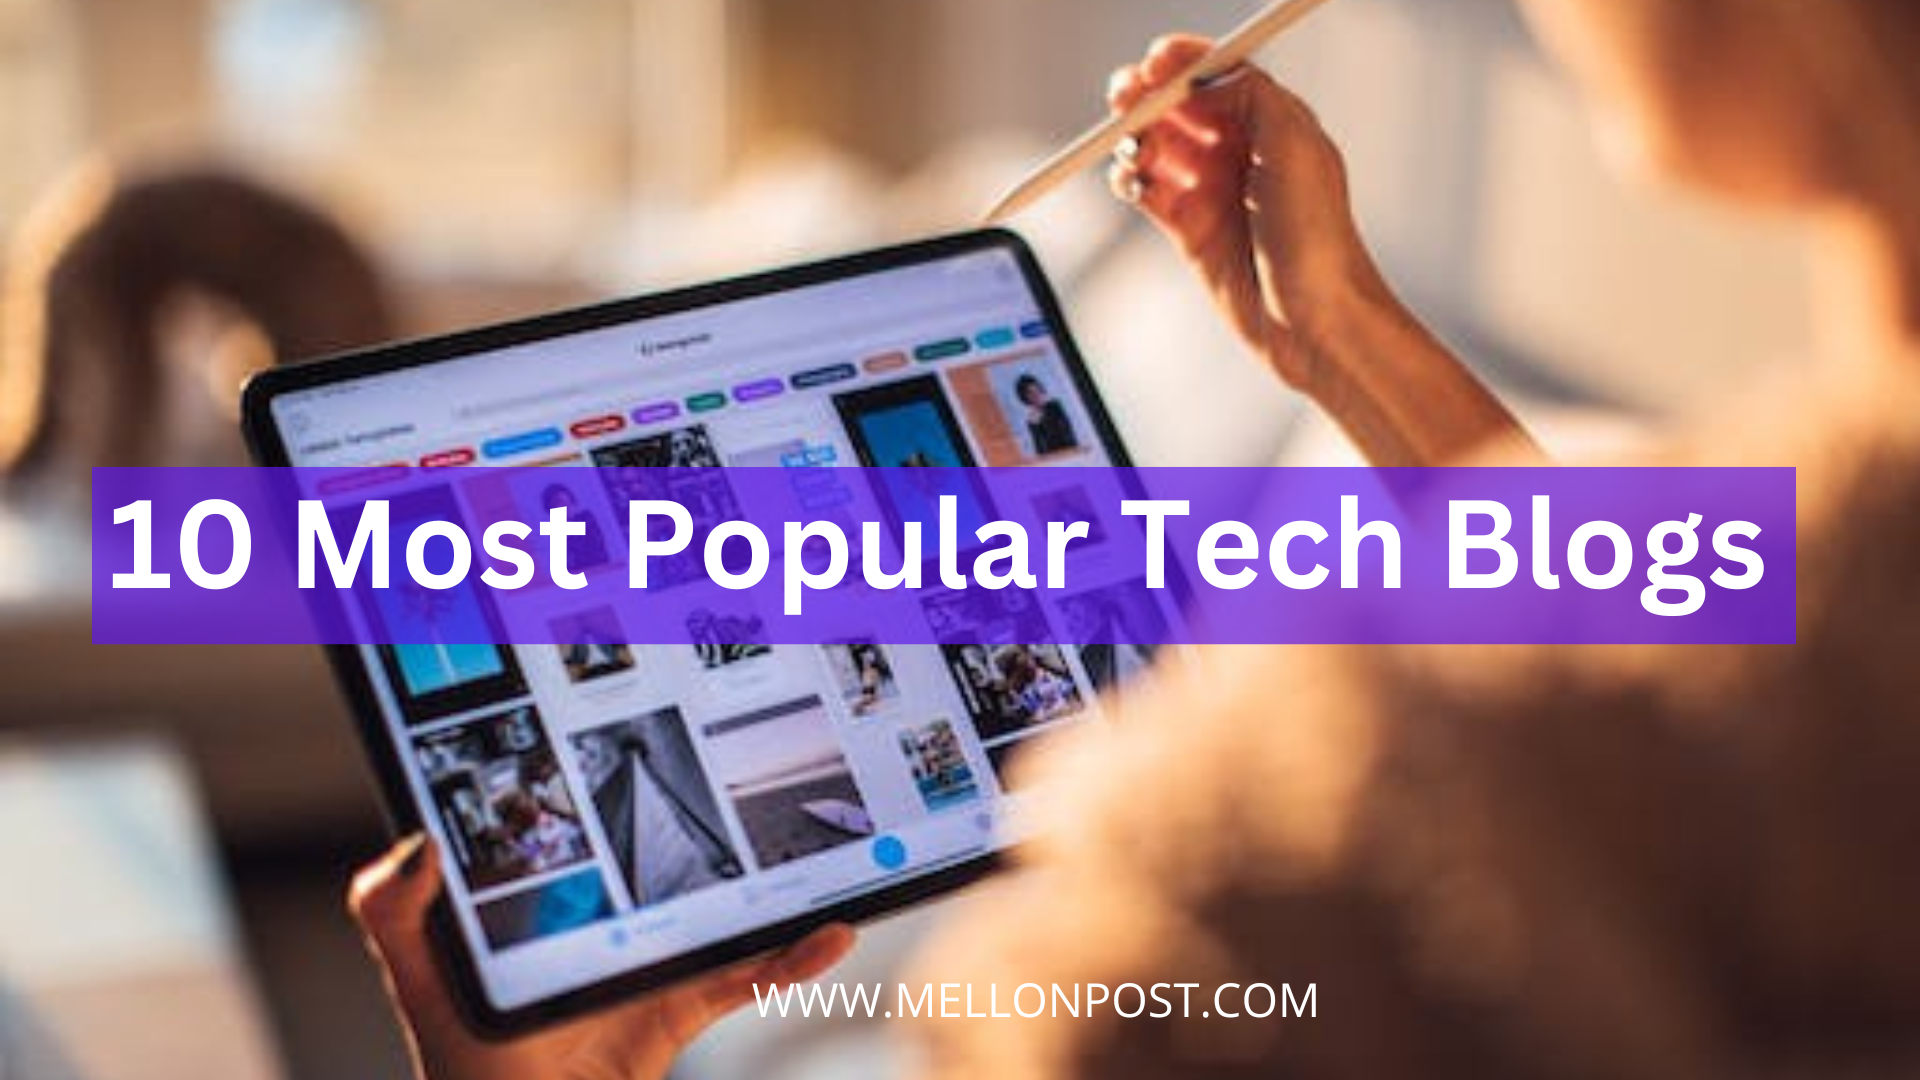 10 Popular Tech Blogs That You Should Know